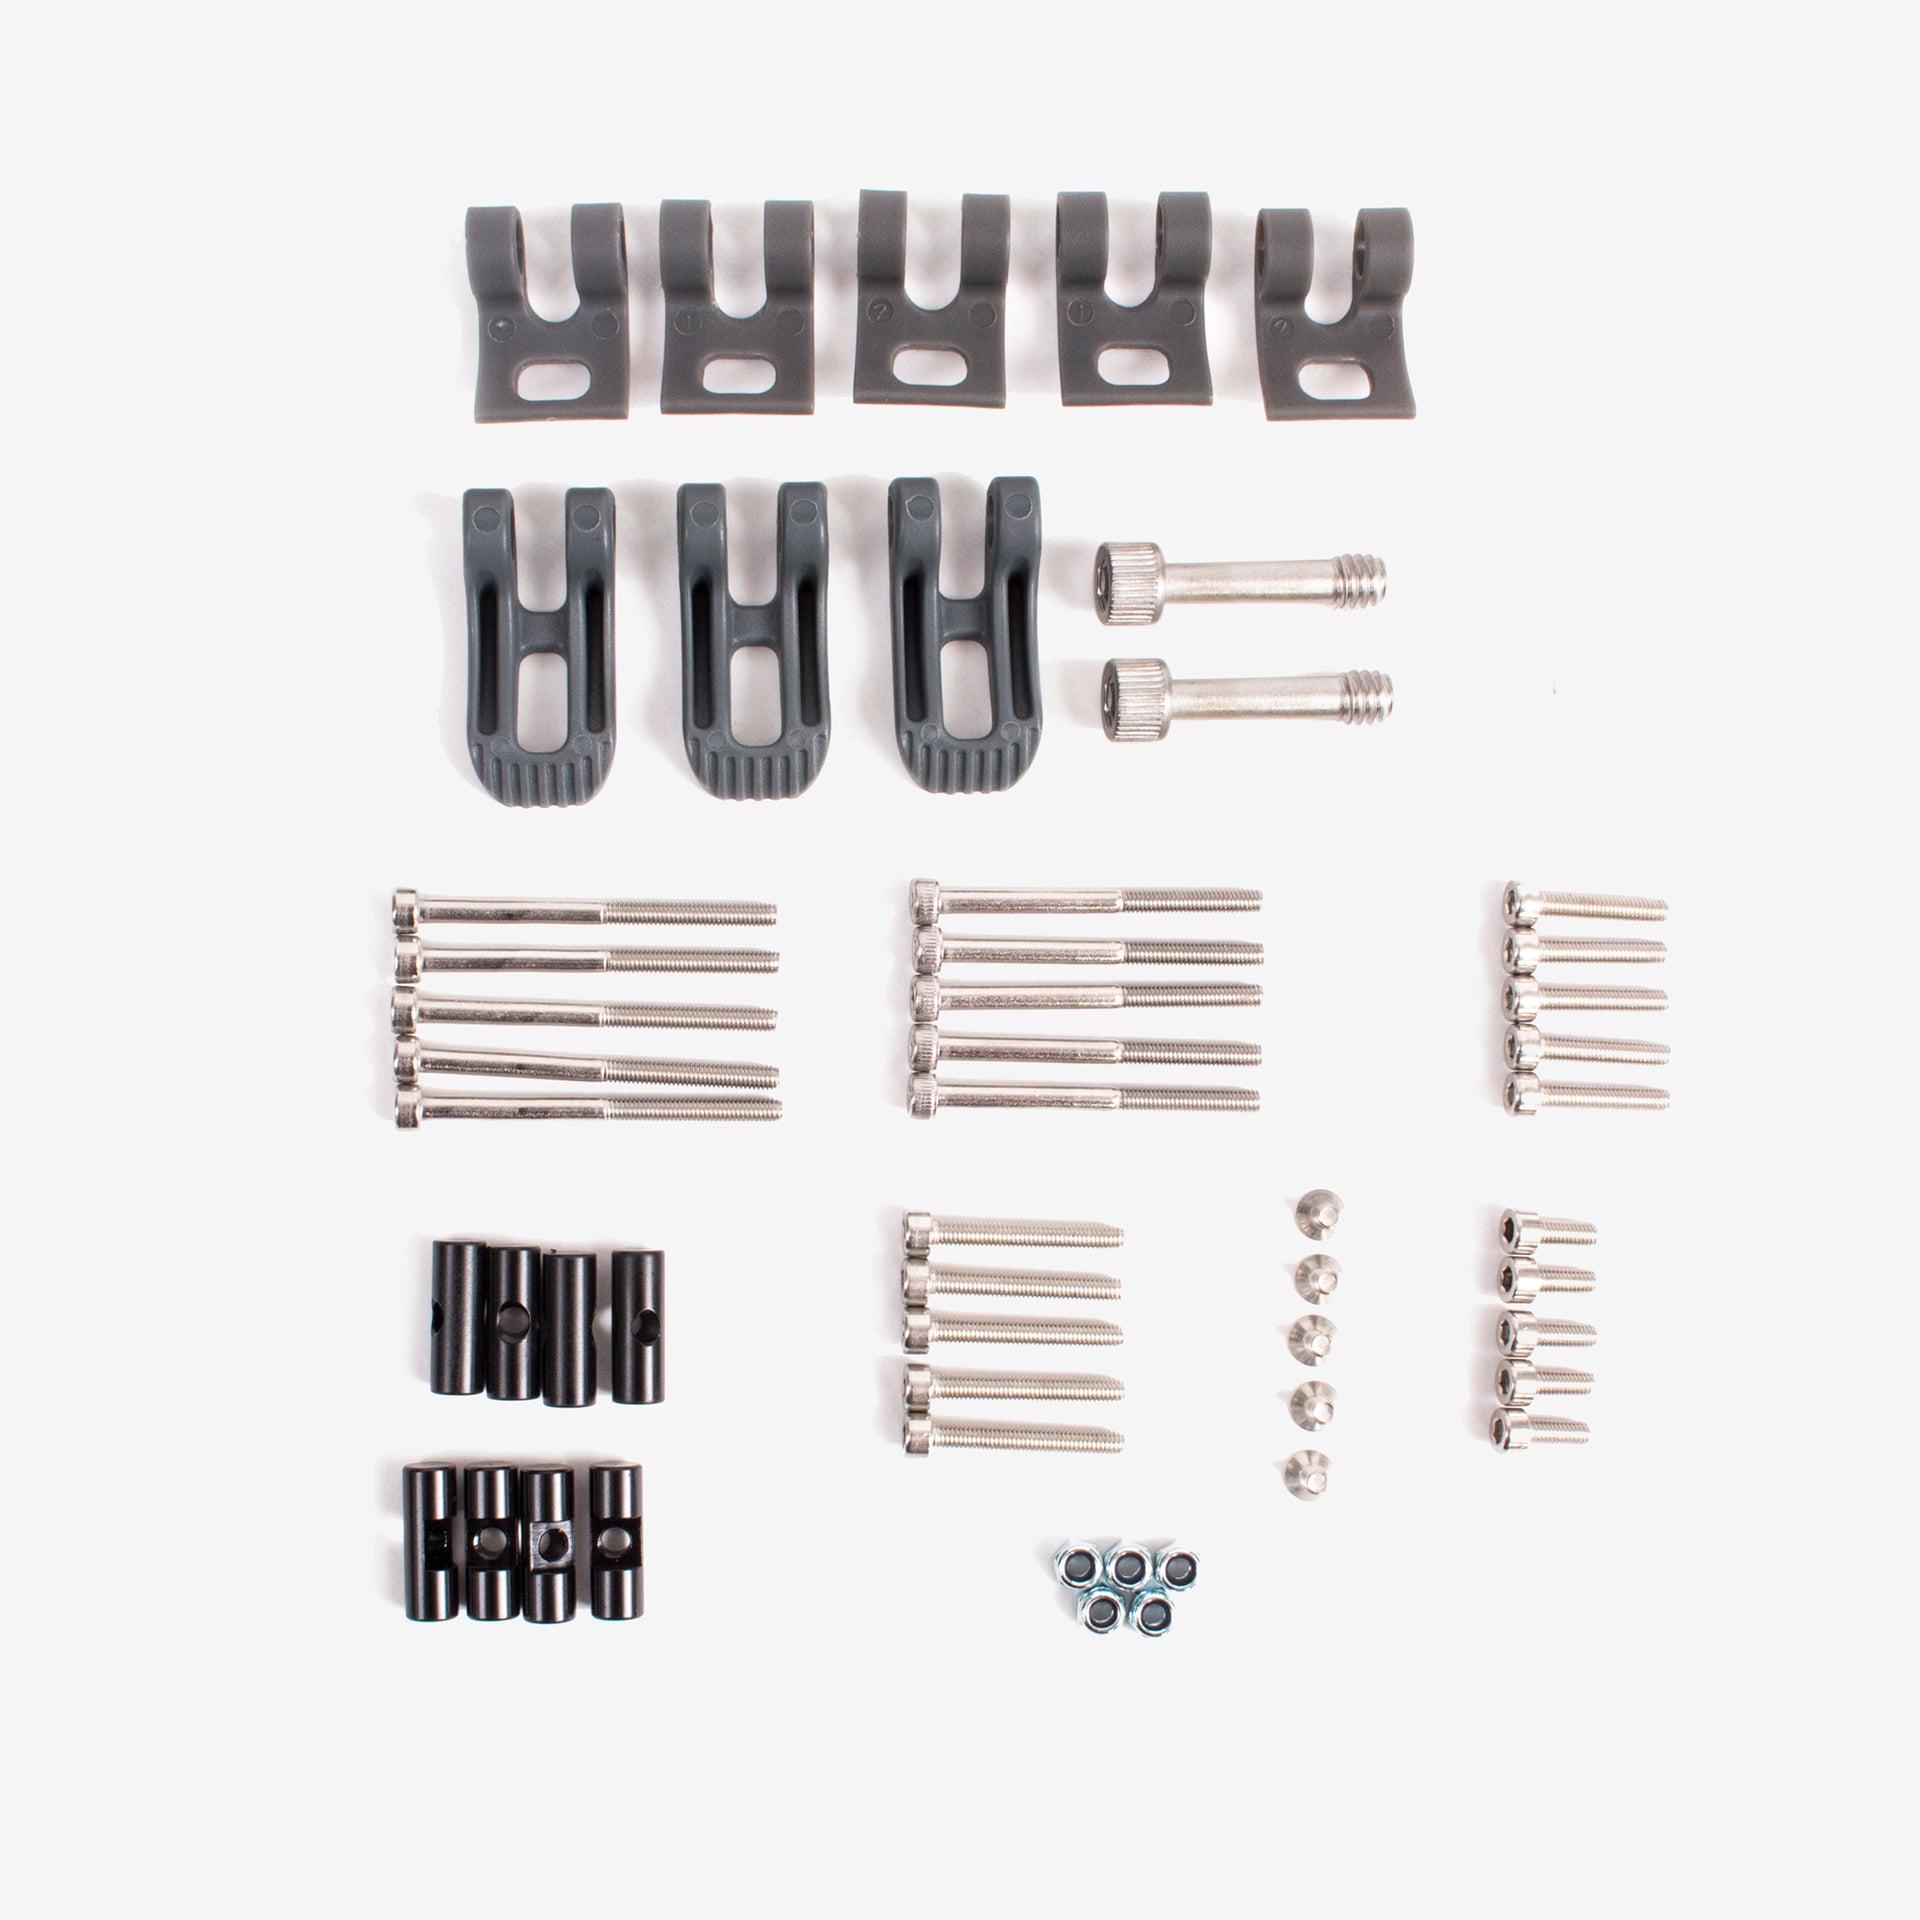 Spares kit. A26261300 spare Parts Kit for.